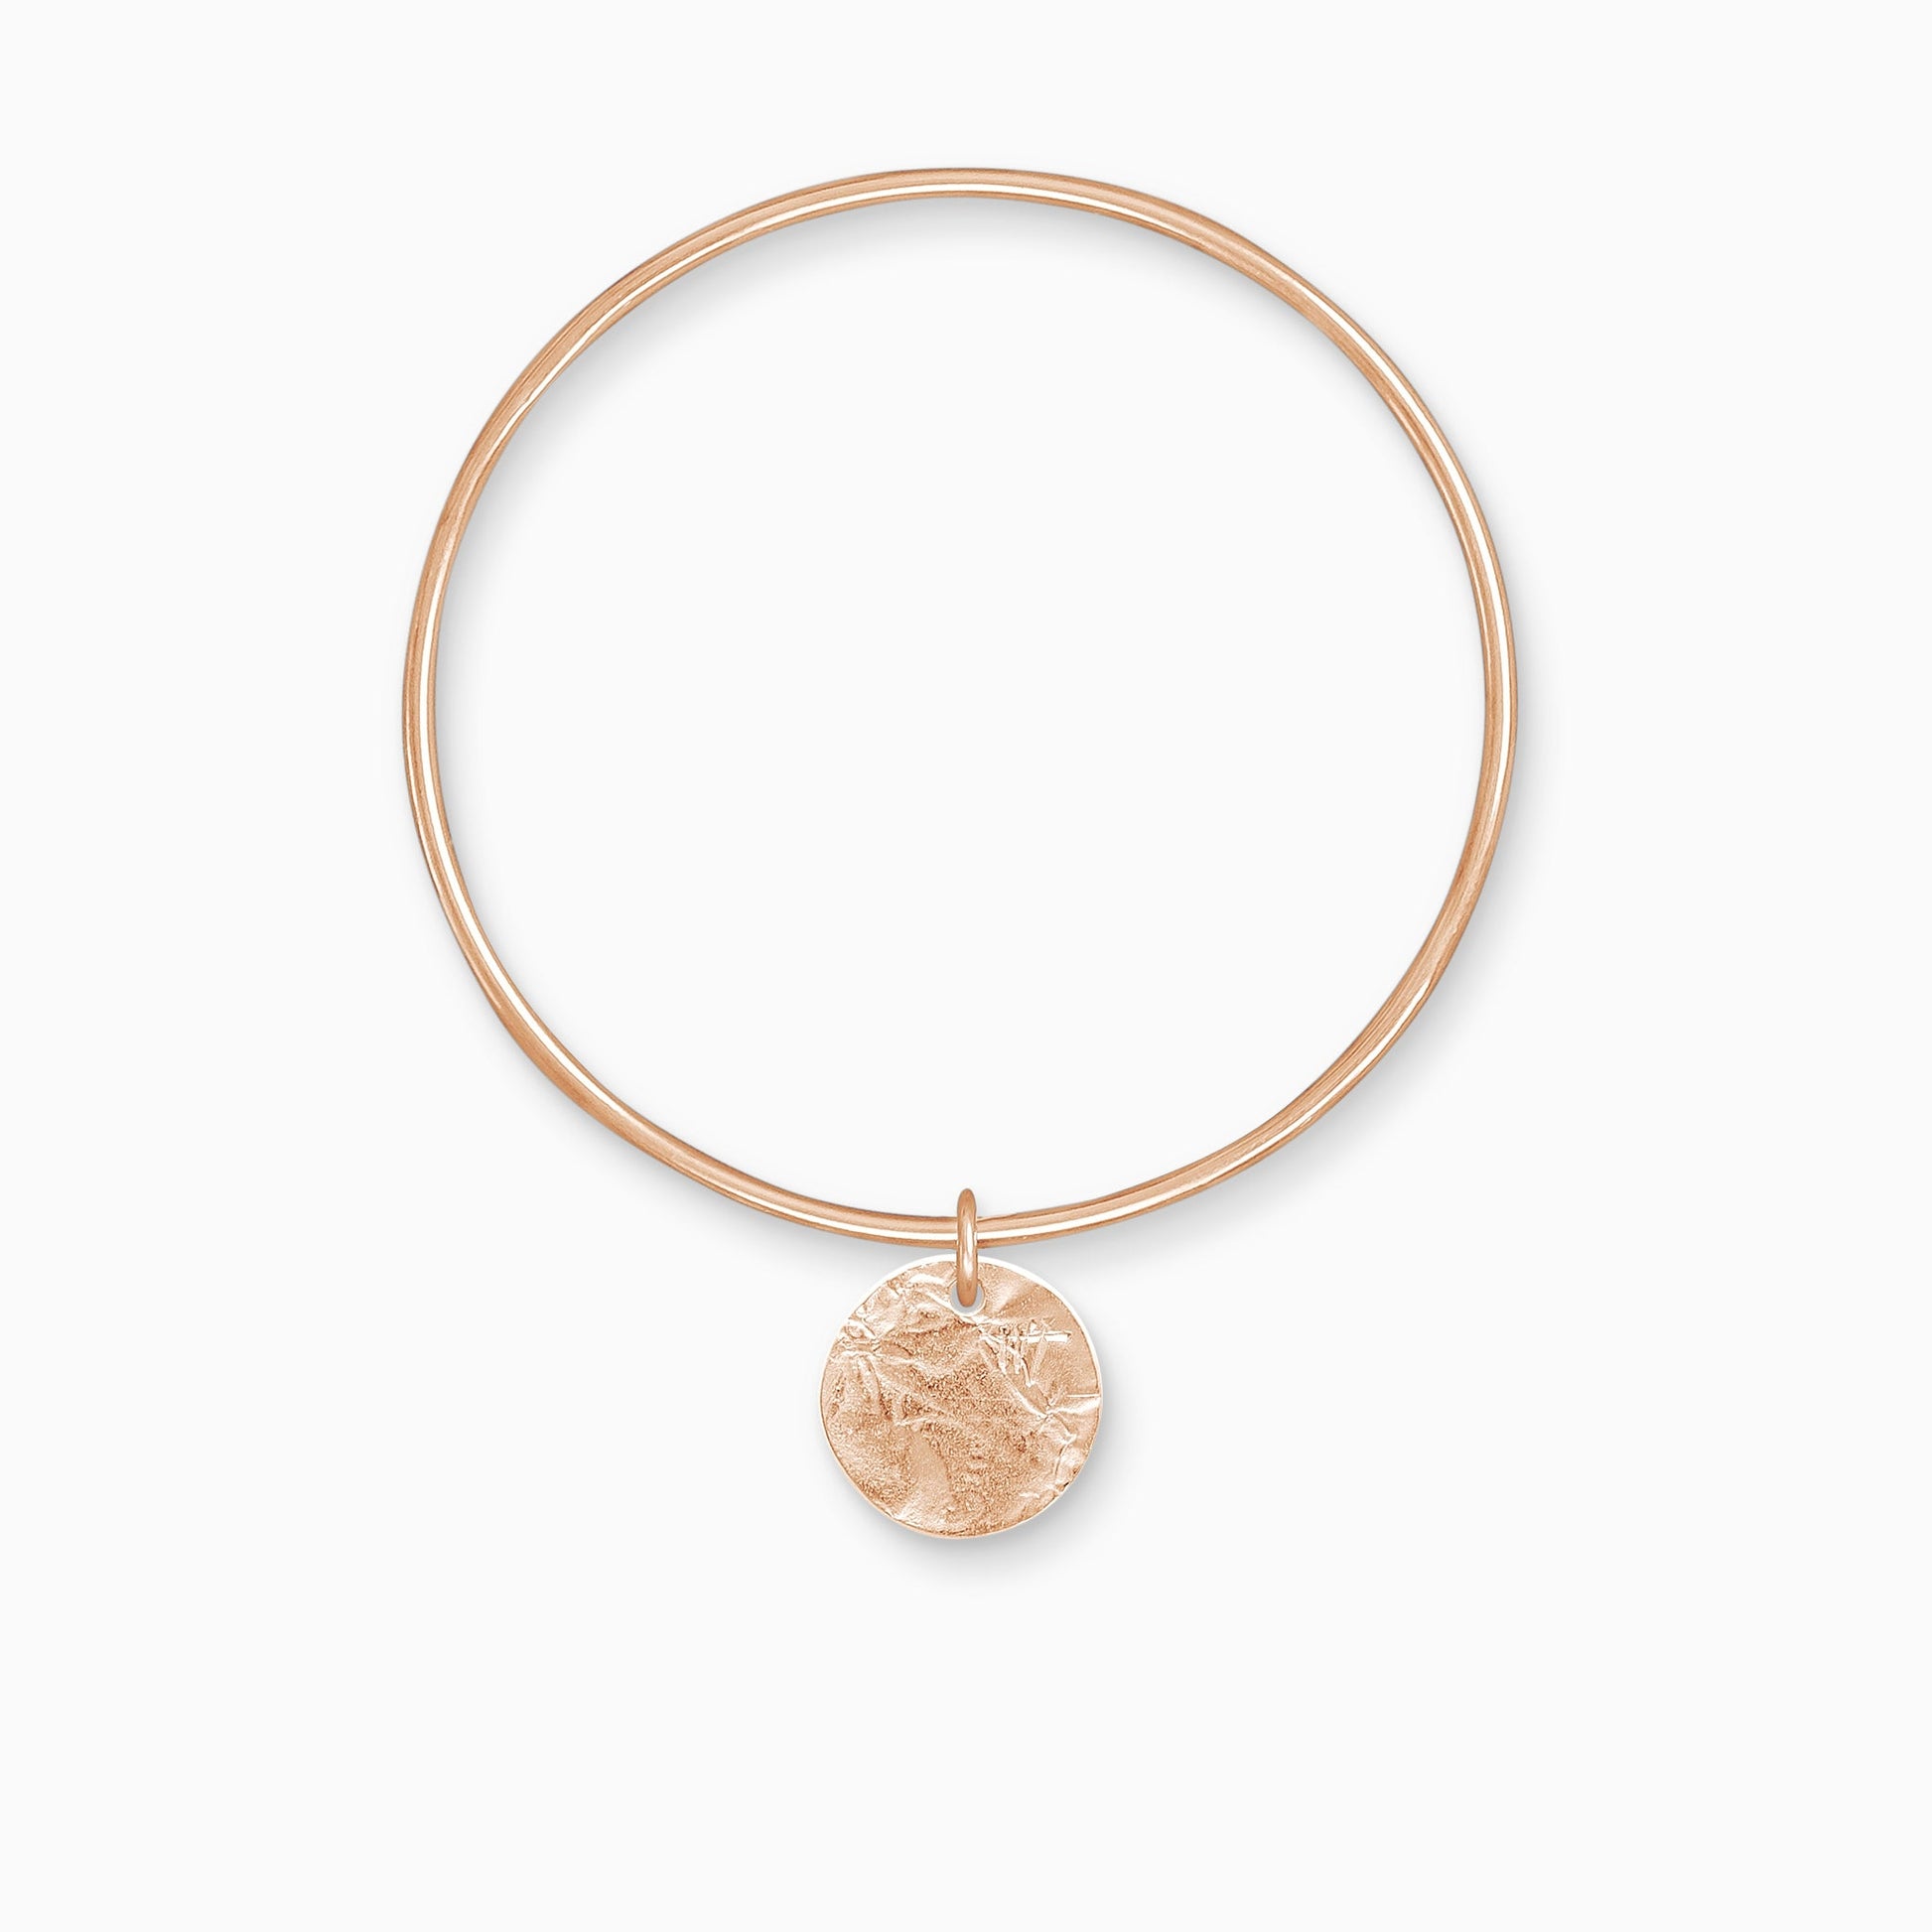 An 18ct Fairtrade rose gold textured, circular, flat disc charm freely moving on a round wire bangle. Charm 17mm. Bangle 63mm inside diameter x 2mm round wire.